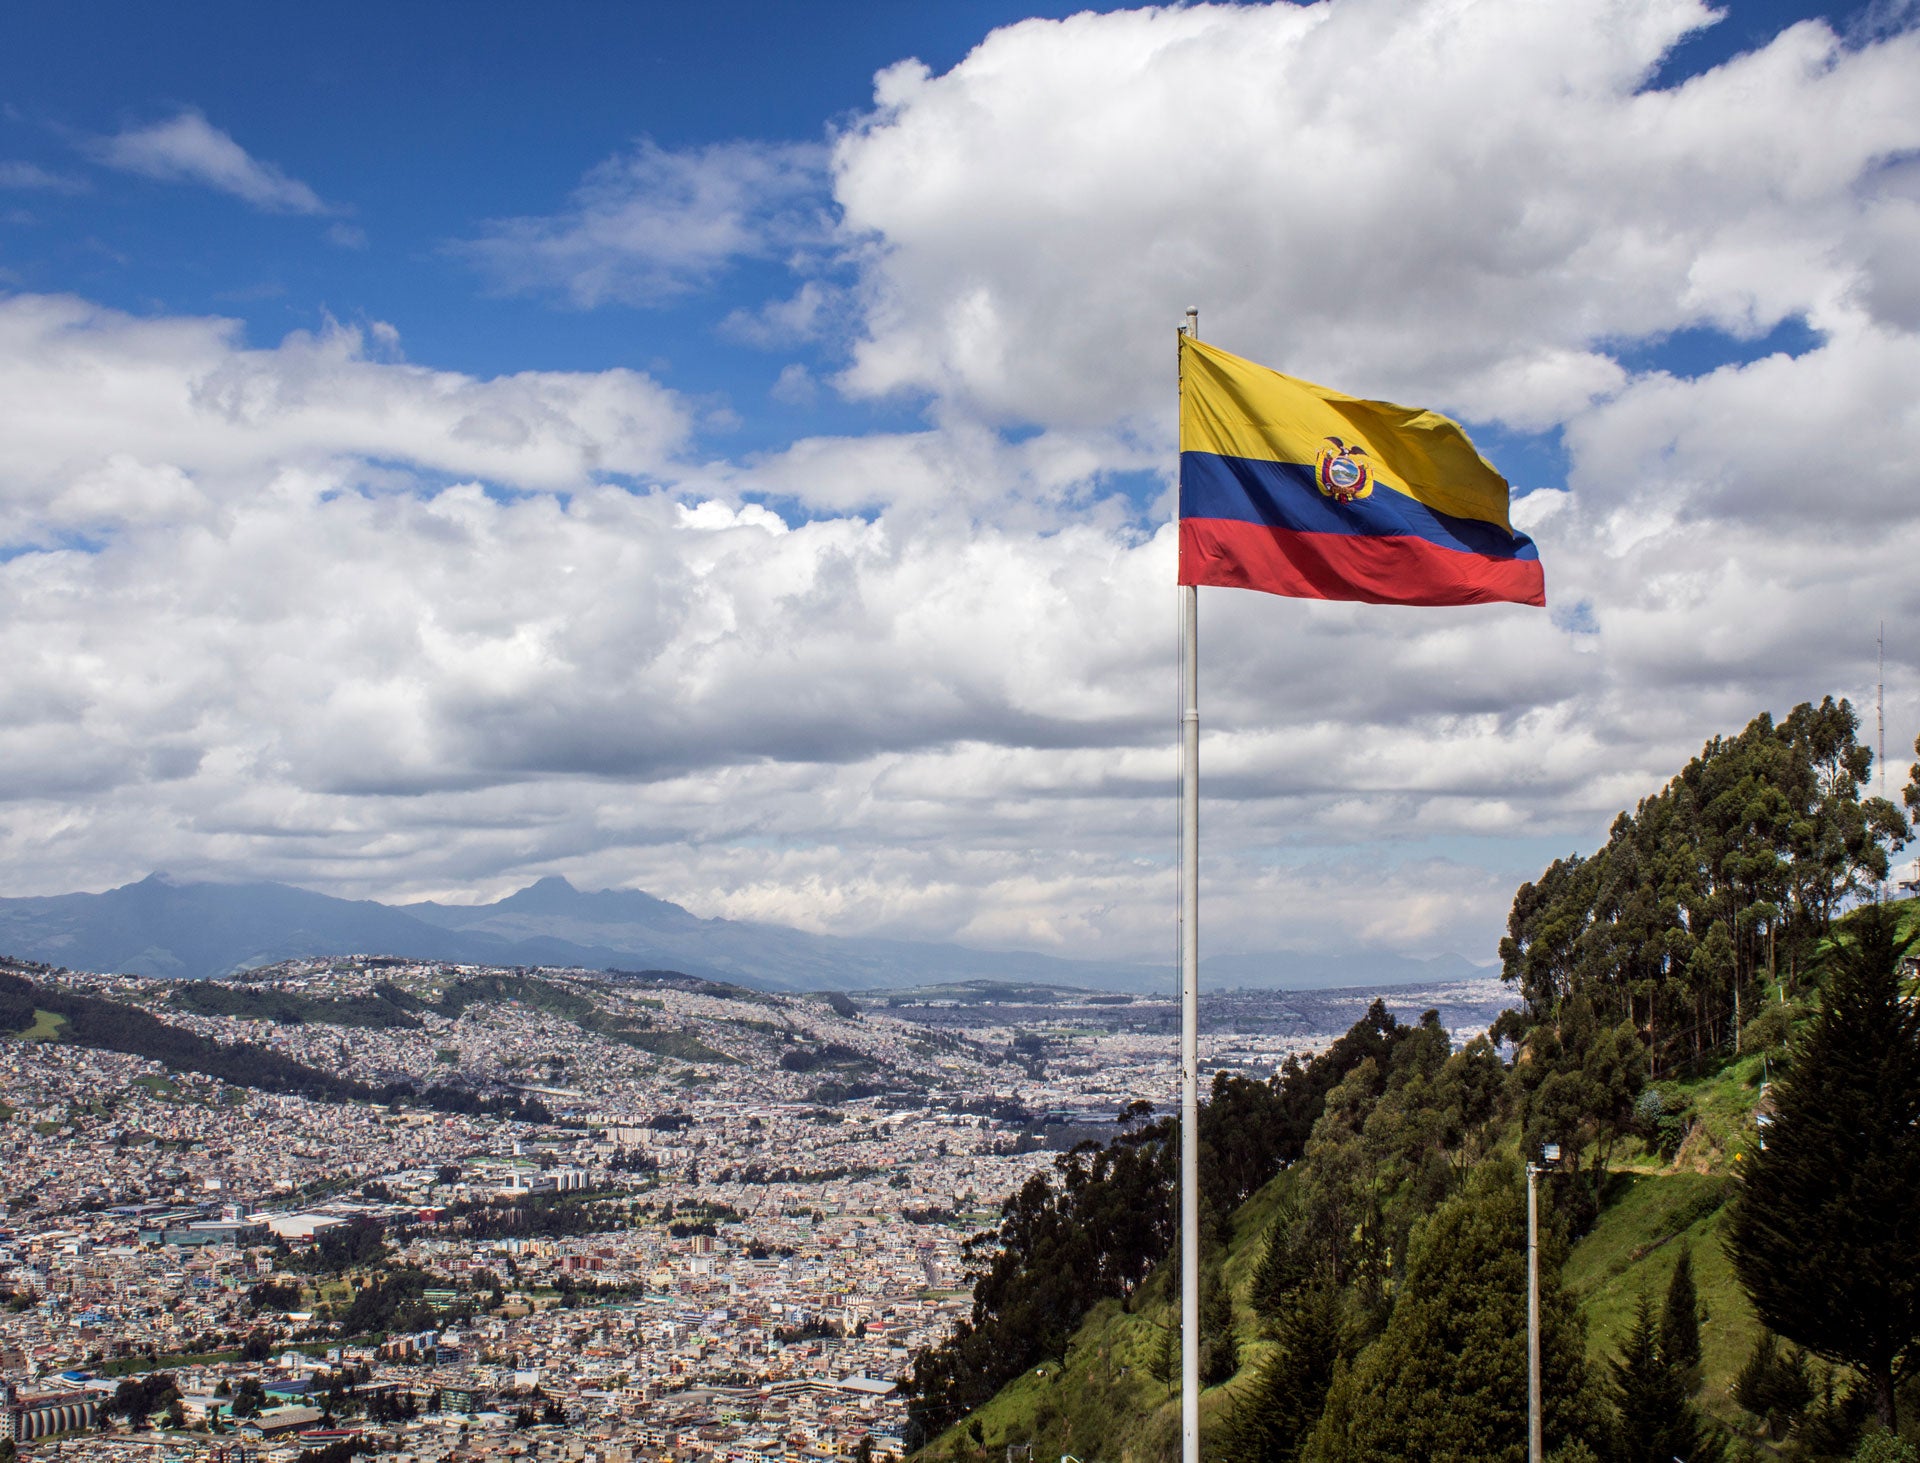 Ecuador is in serious need of proper data protection laws following massive breach